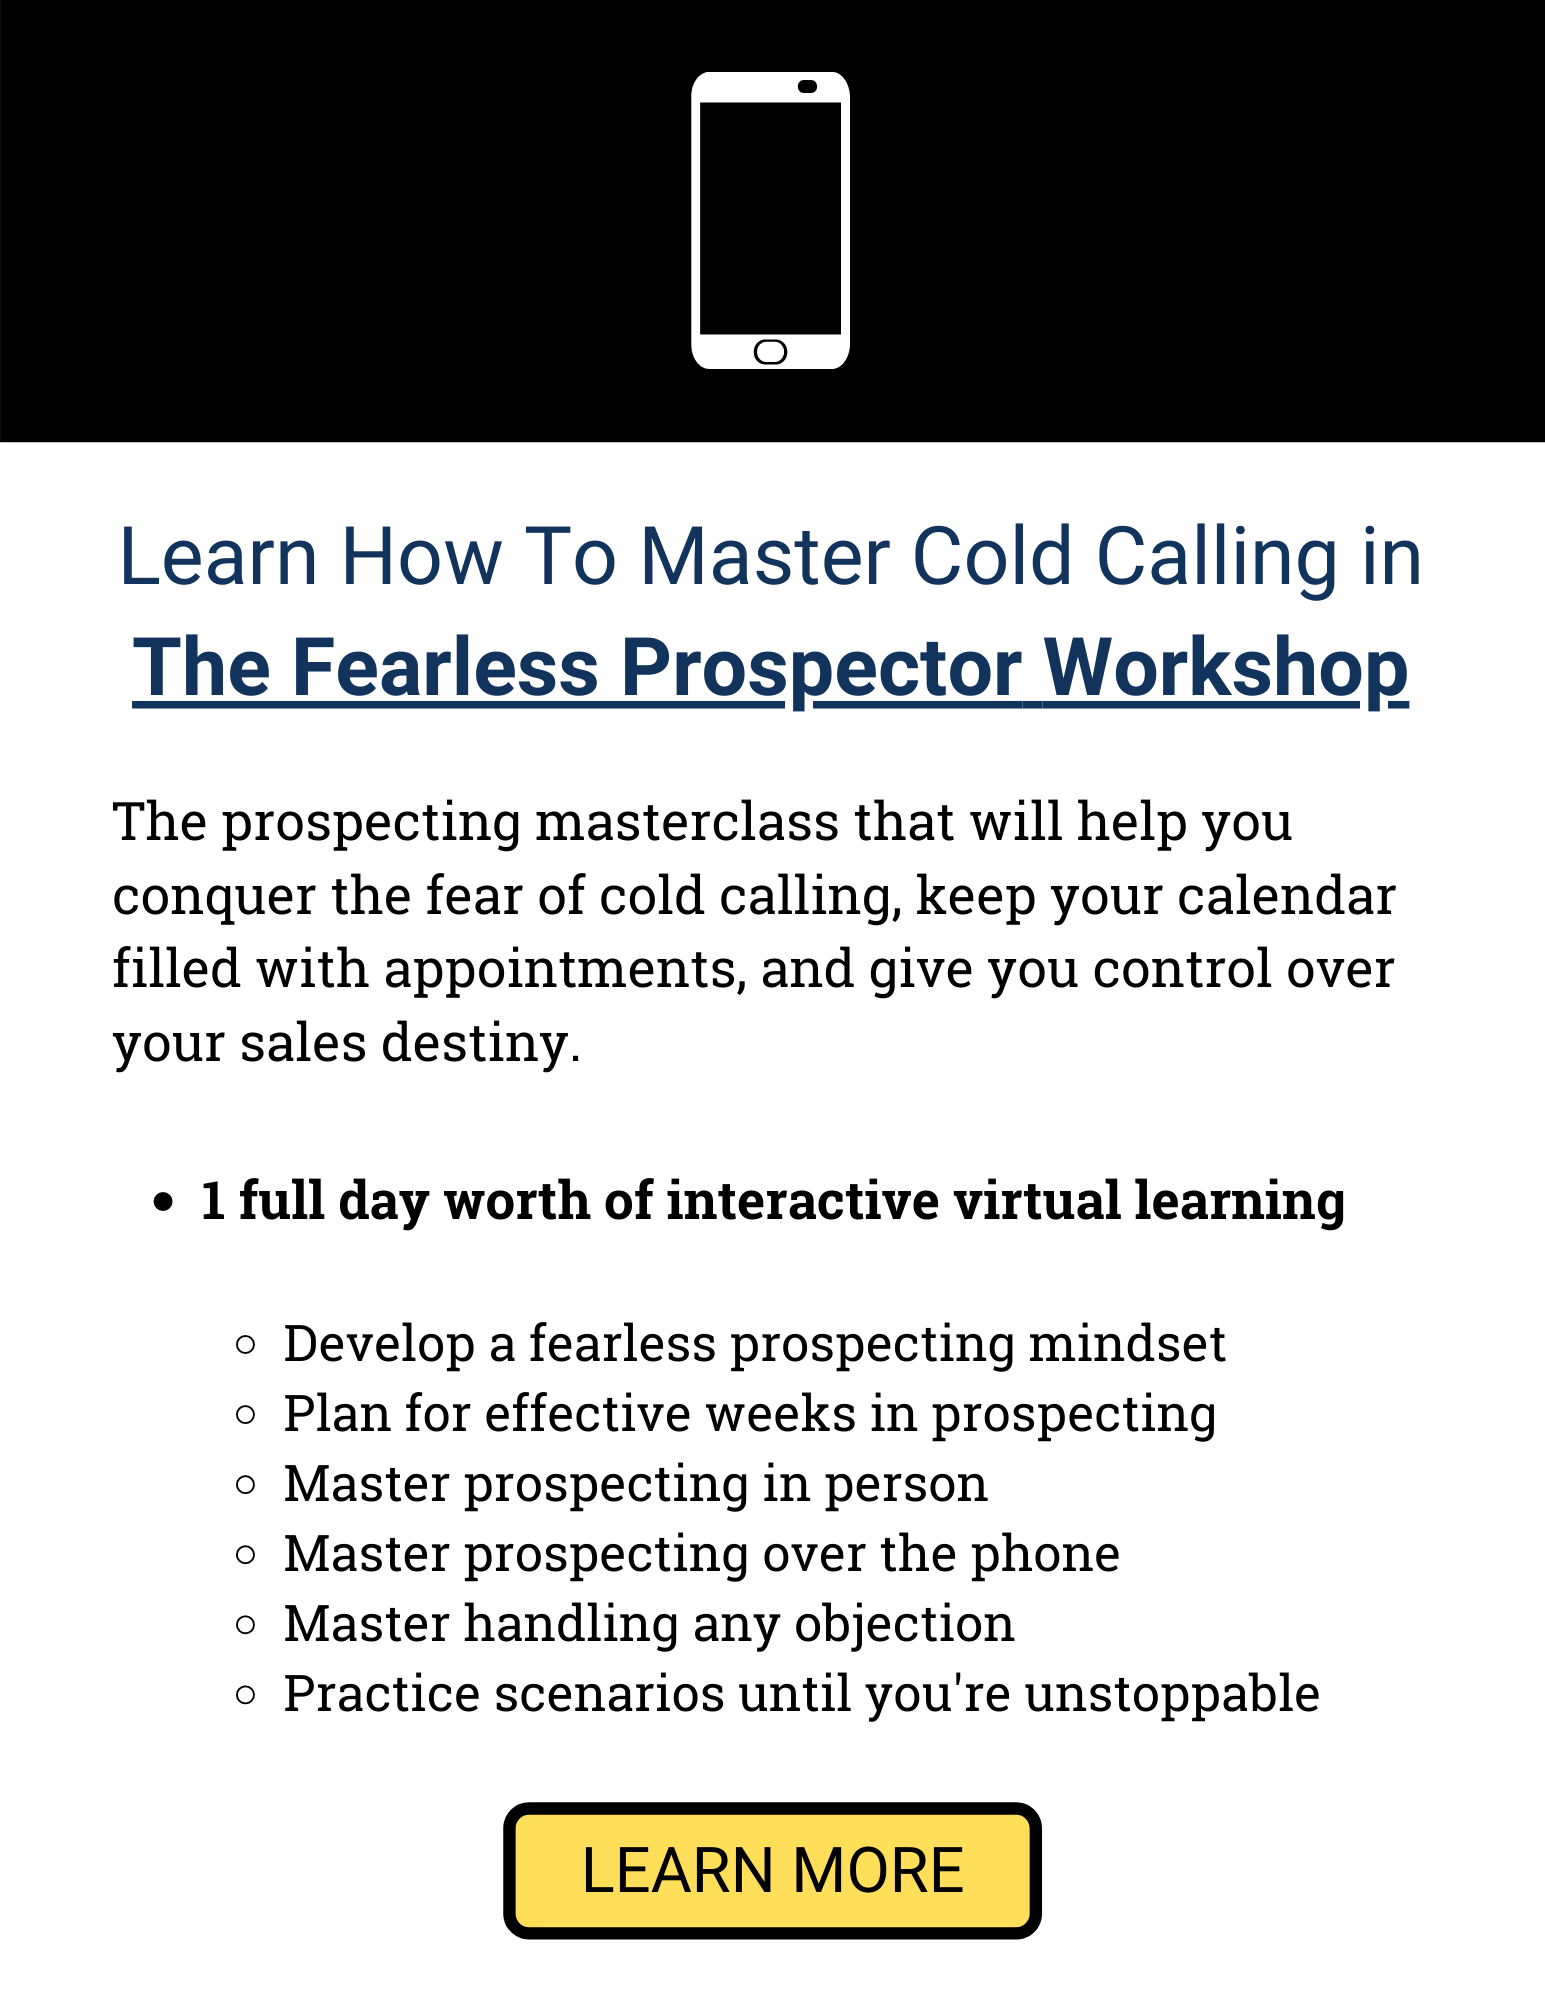 The Fearless Prospector Virtual Workshop from Modern Sales Training